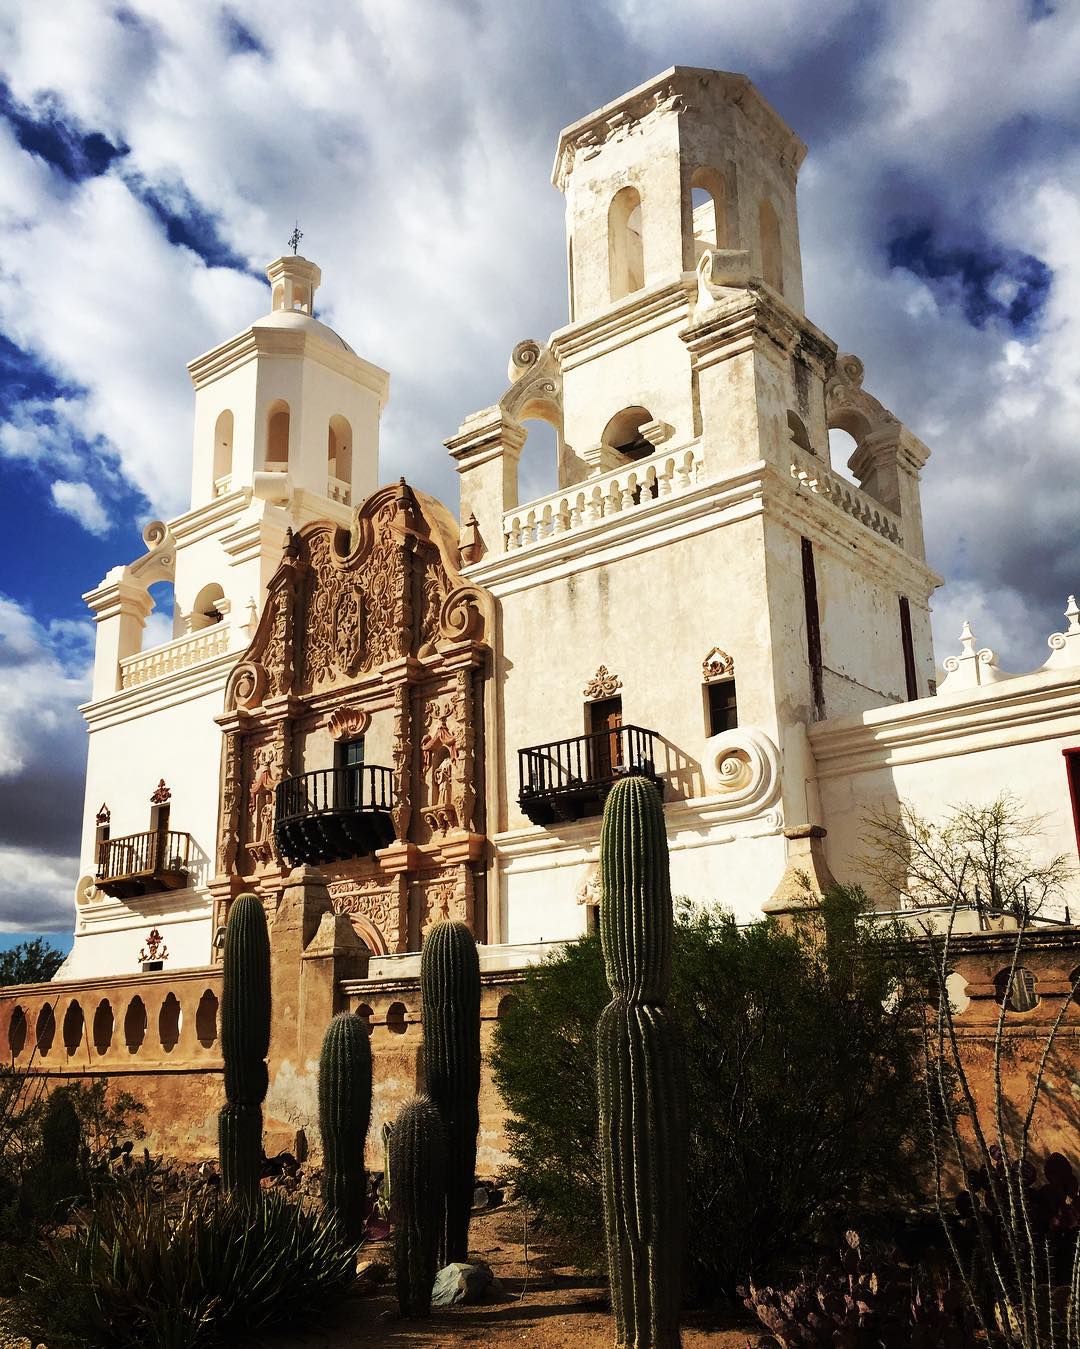 White Mission San Xavier del Bac with cacti in front of it. Photo by Instagram user @morgan_lorraine_